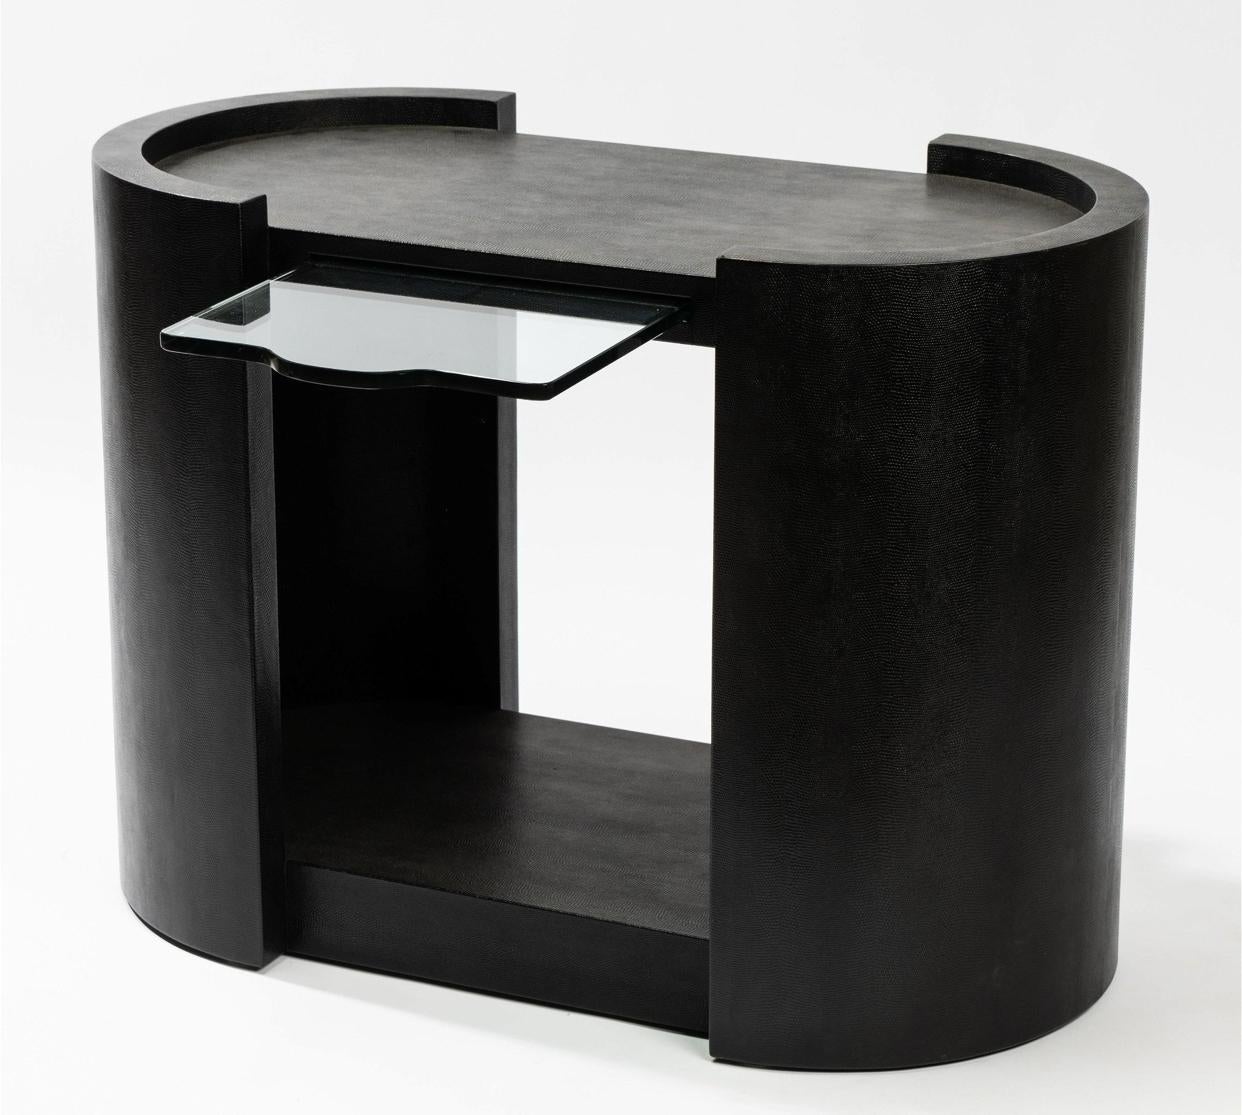 Rare Karl Springer race track oval two tiered side table, wrapped in black lizard skin embossed leather. This hard to find table also features a pull out glass shelf for anything from writing to drink placement. The curved sides are a classic design